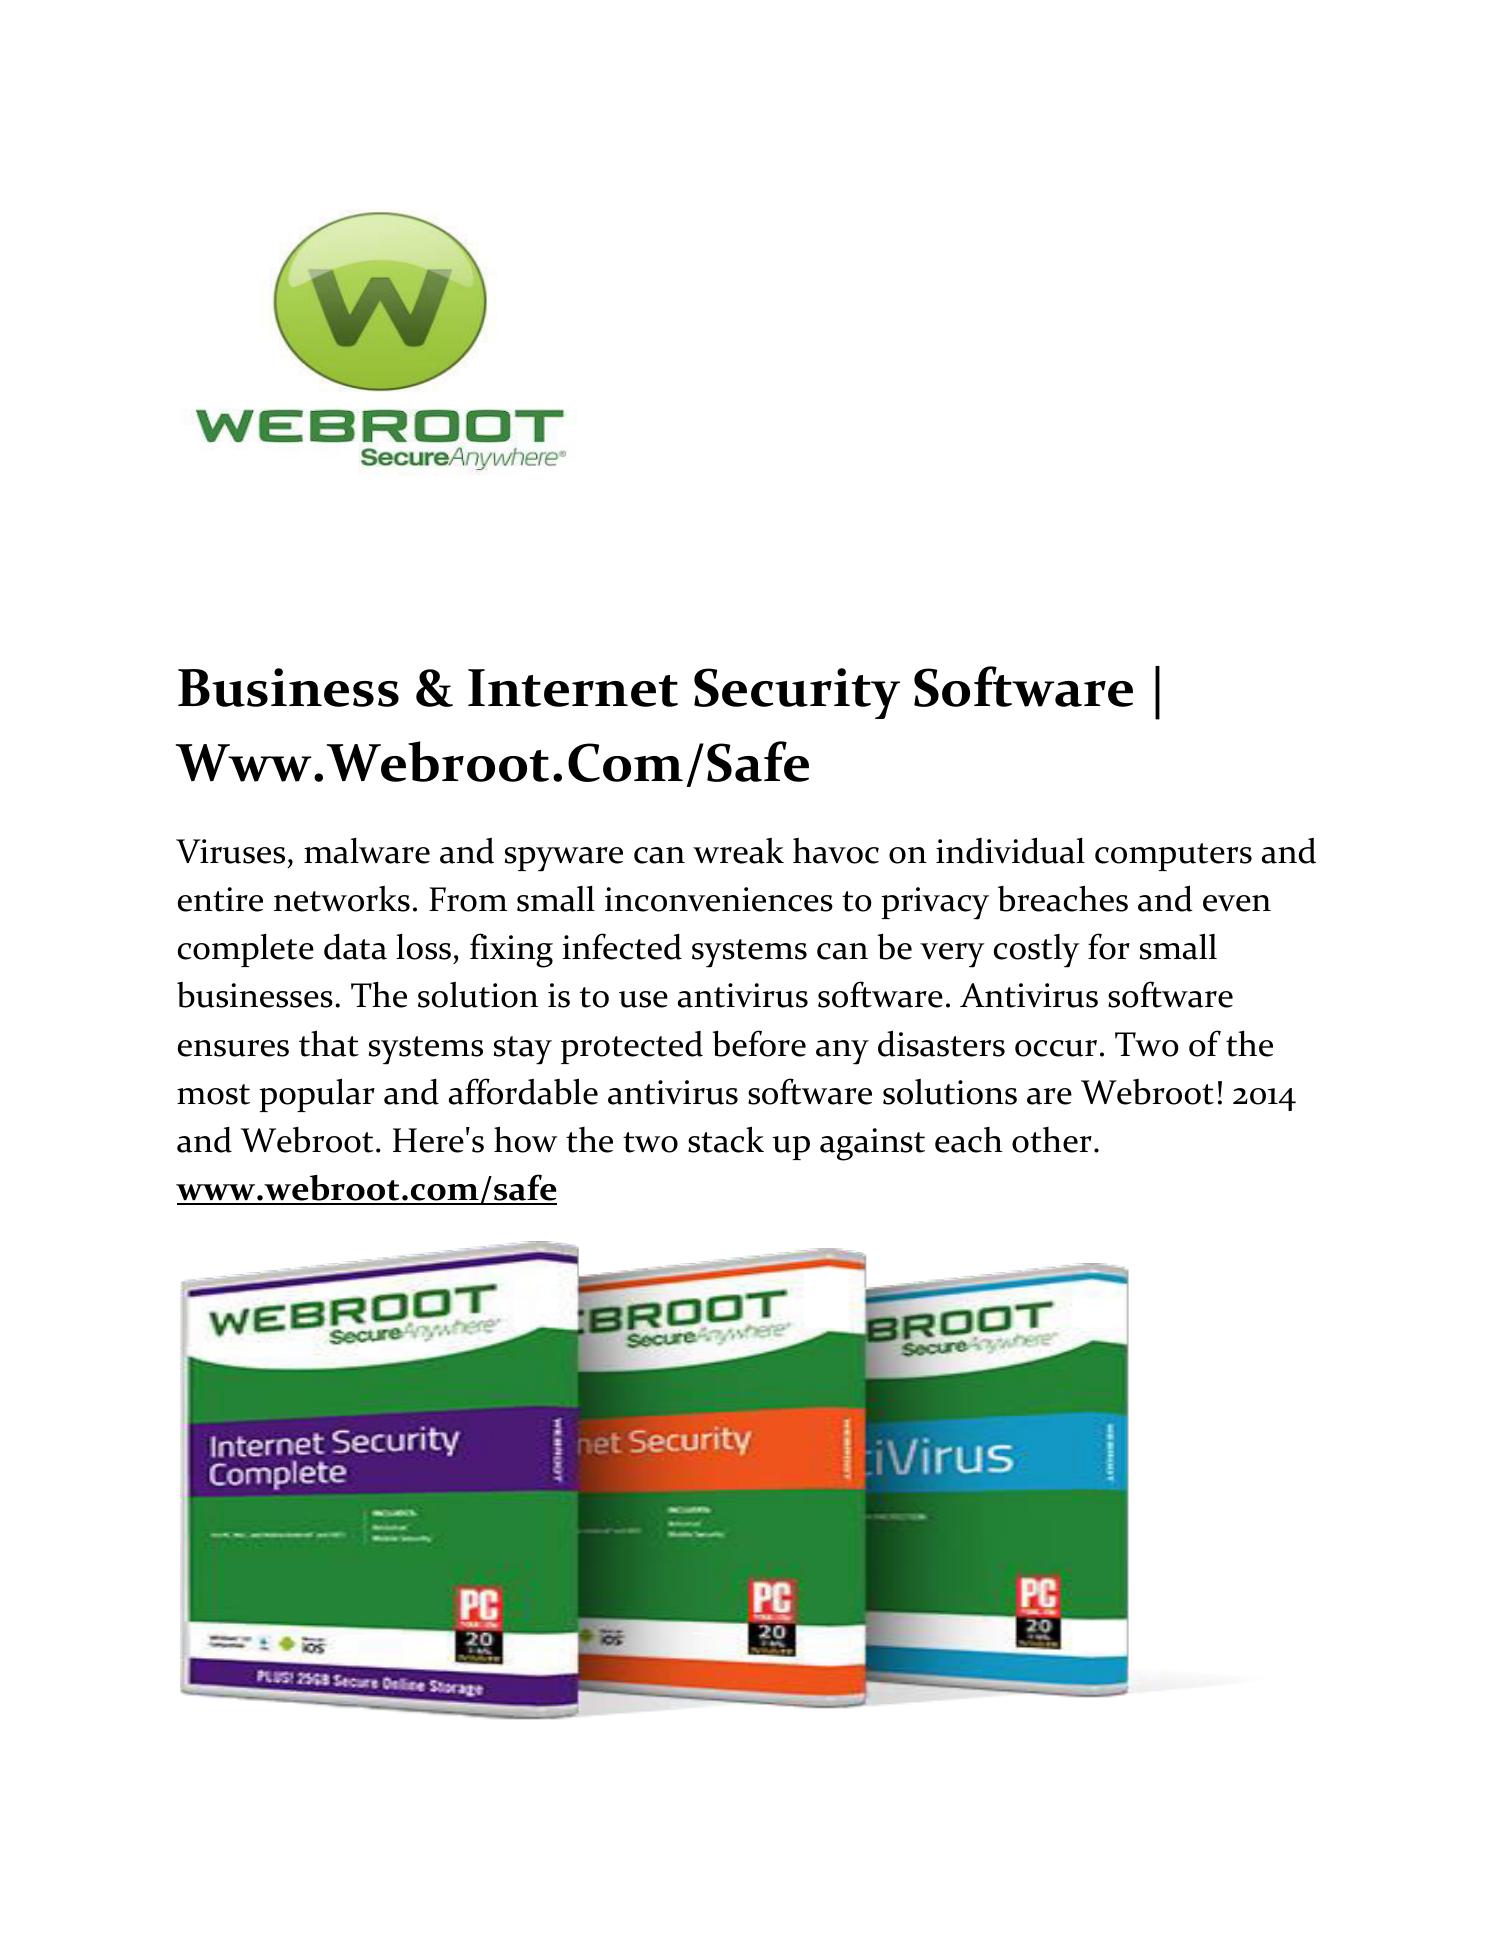 Webroot Internet Security Complete with Antivirus 2019